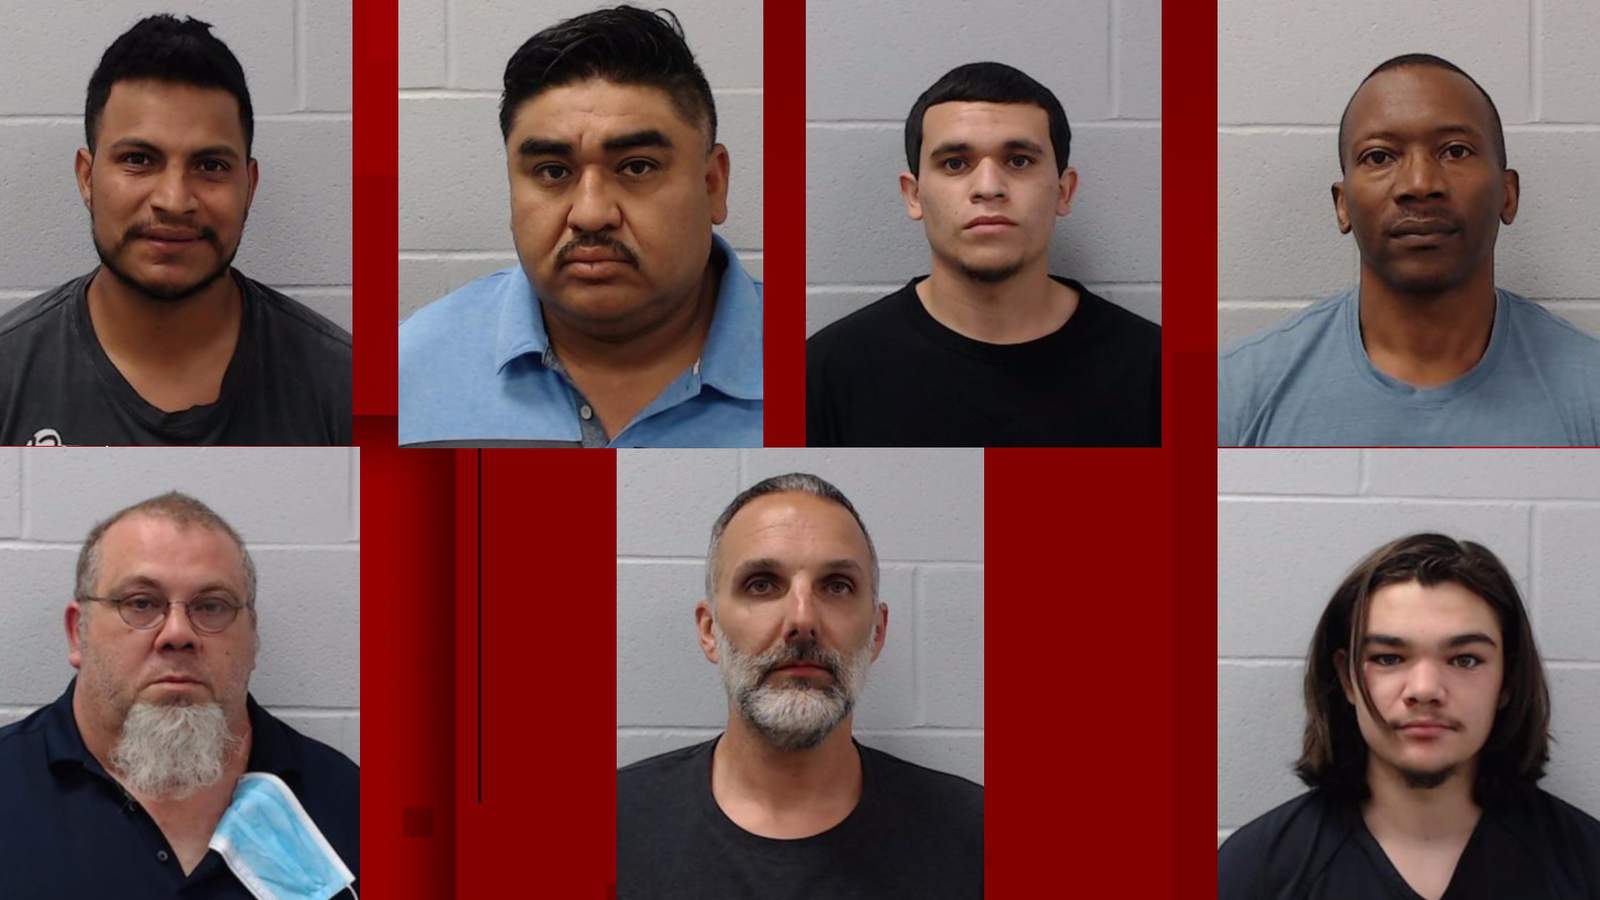 7 men arrested in prostitution sting operation in Hays County